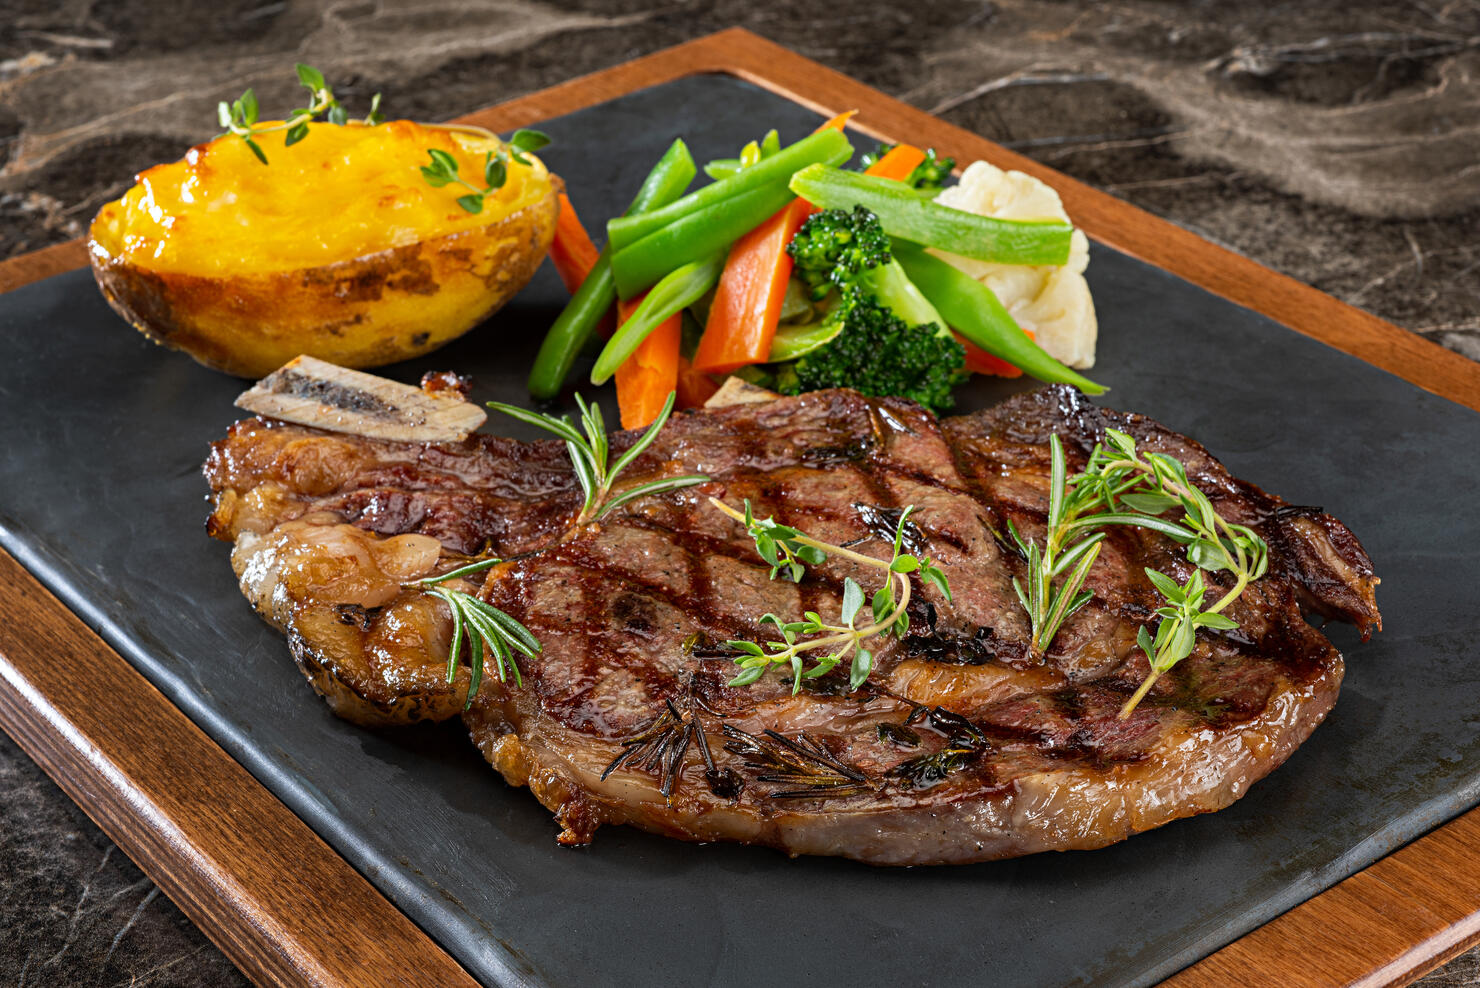 Grilled Steak with Prepared Potato and Steamed Vegetables